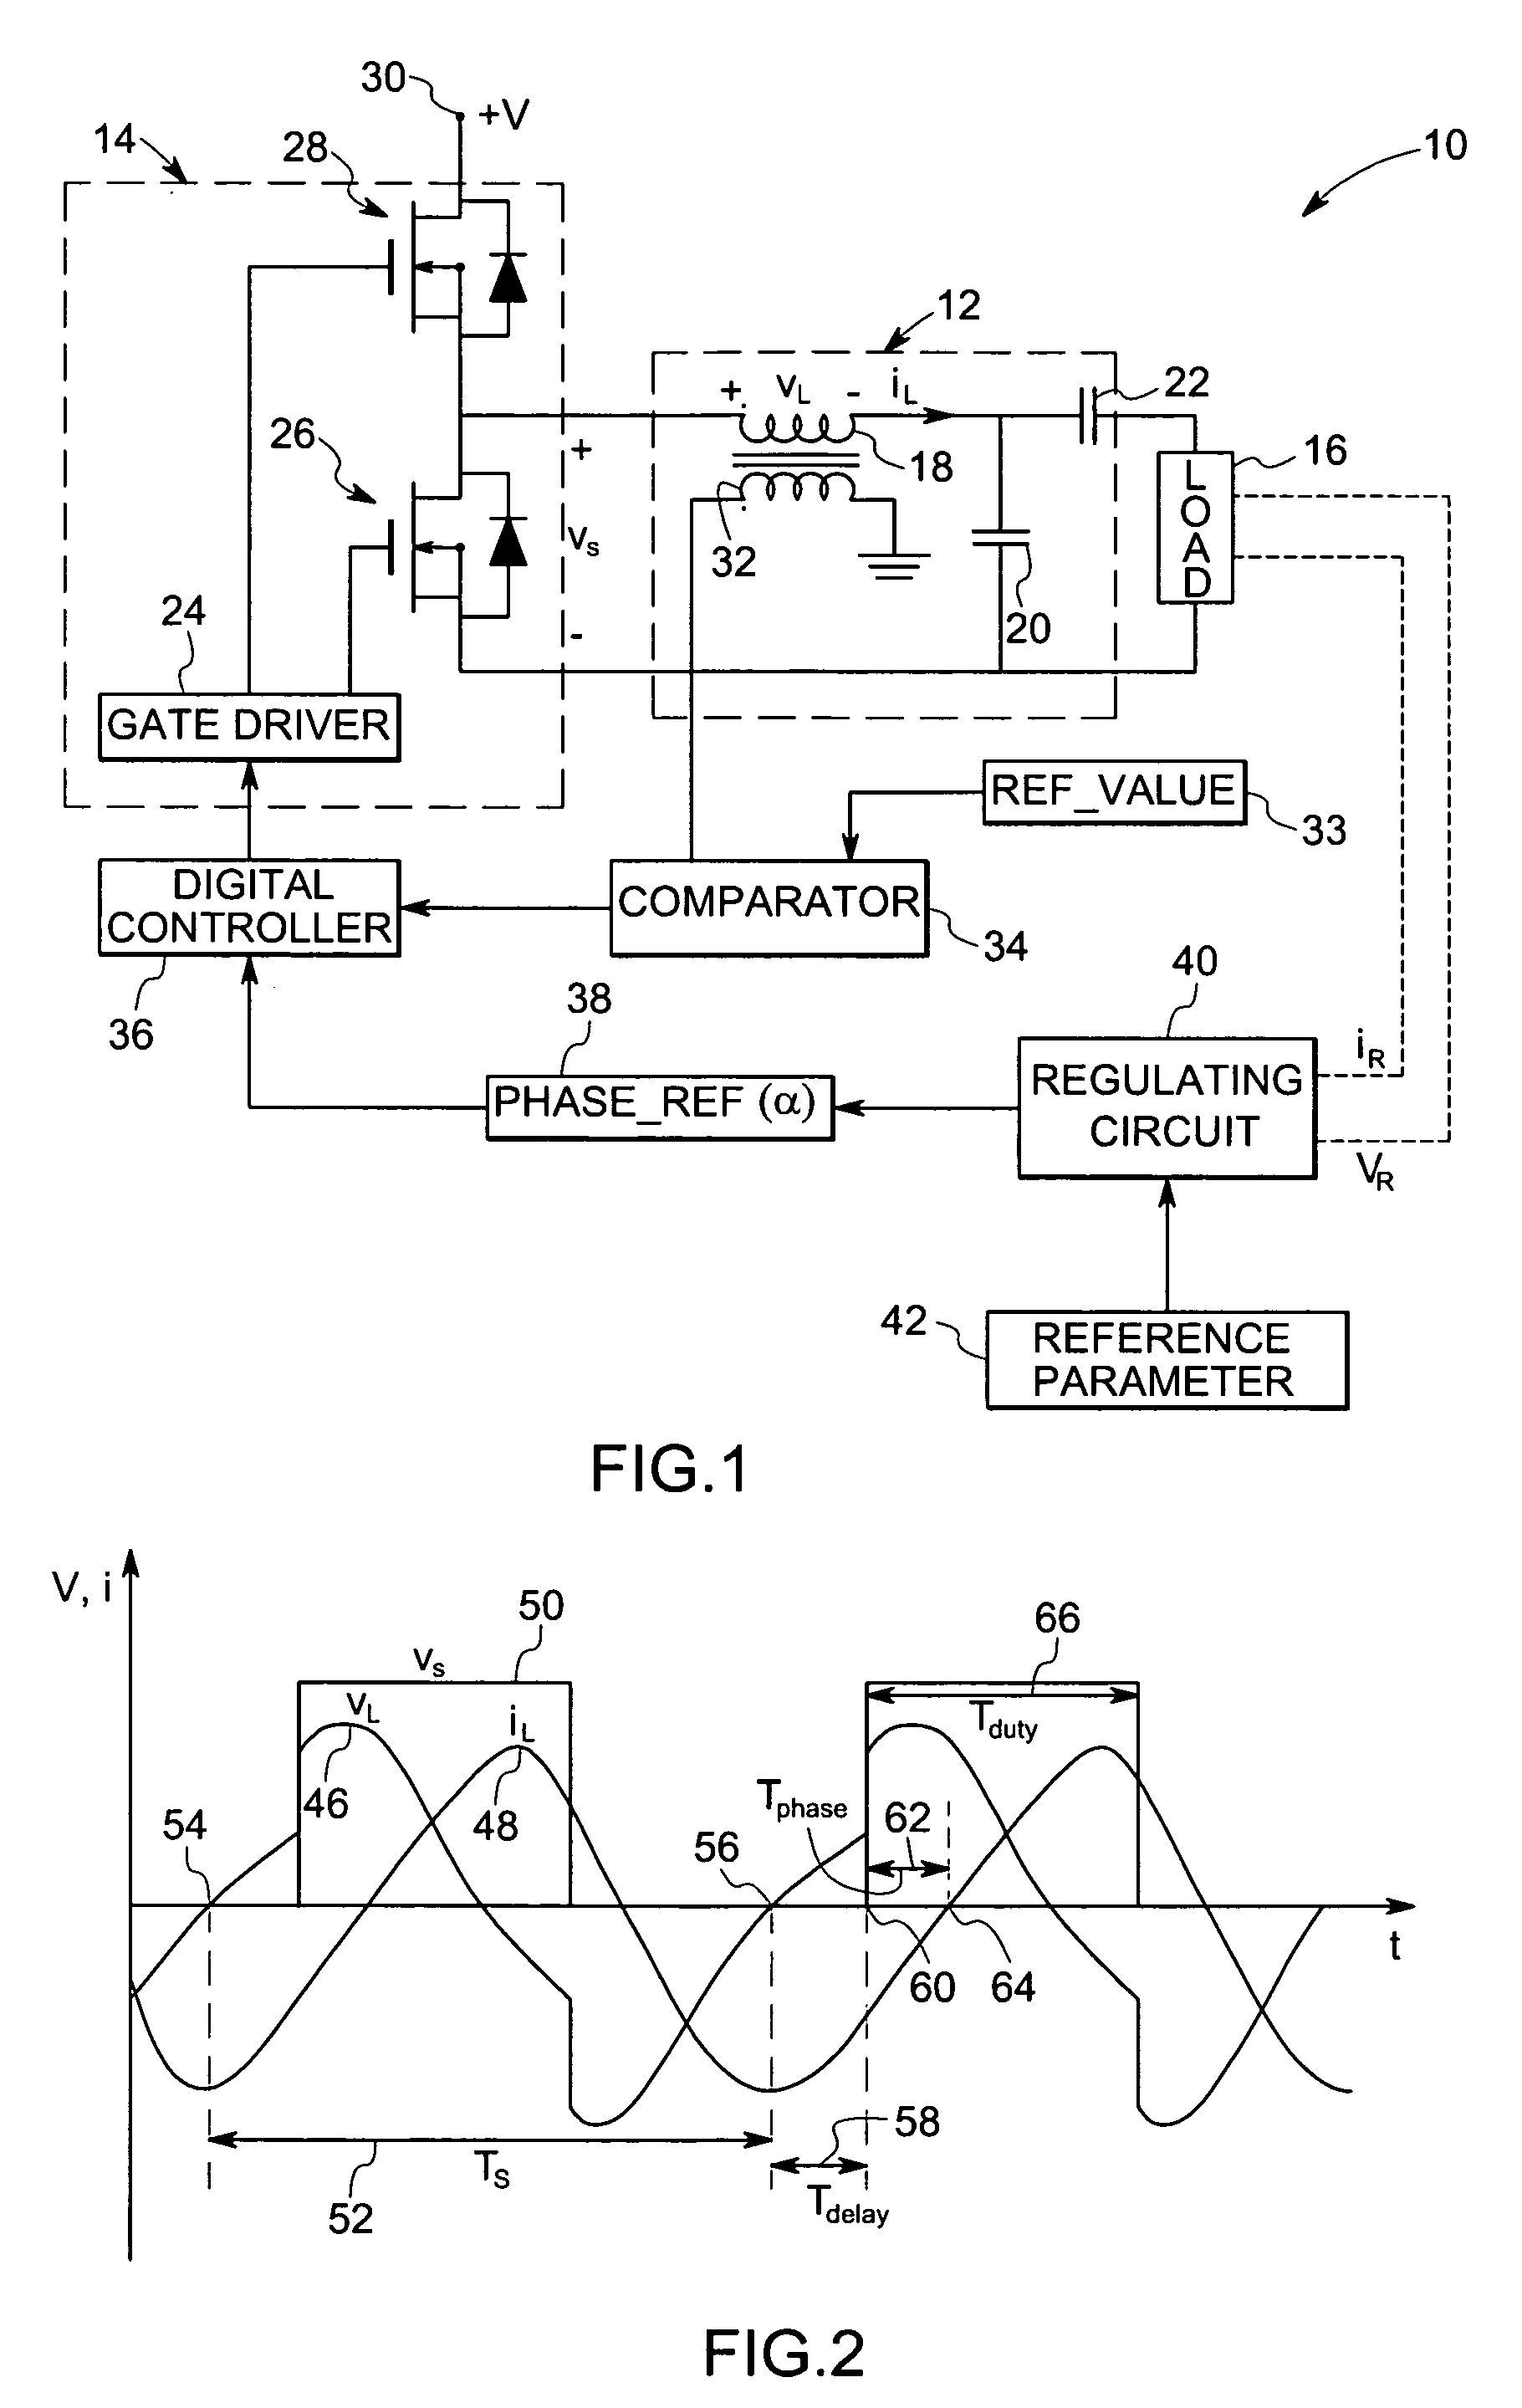 System and method for regulating resonant inverters